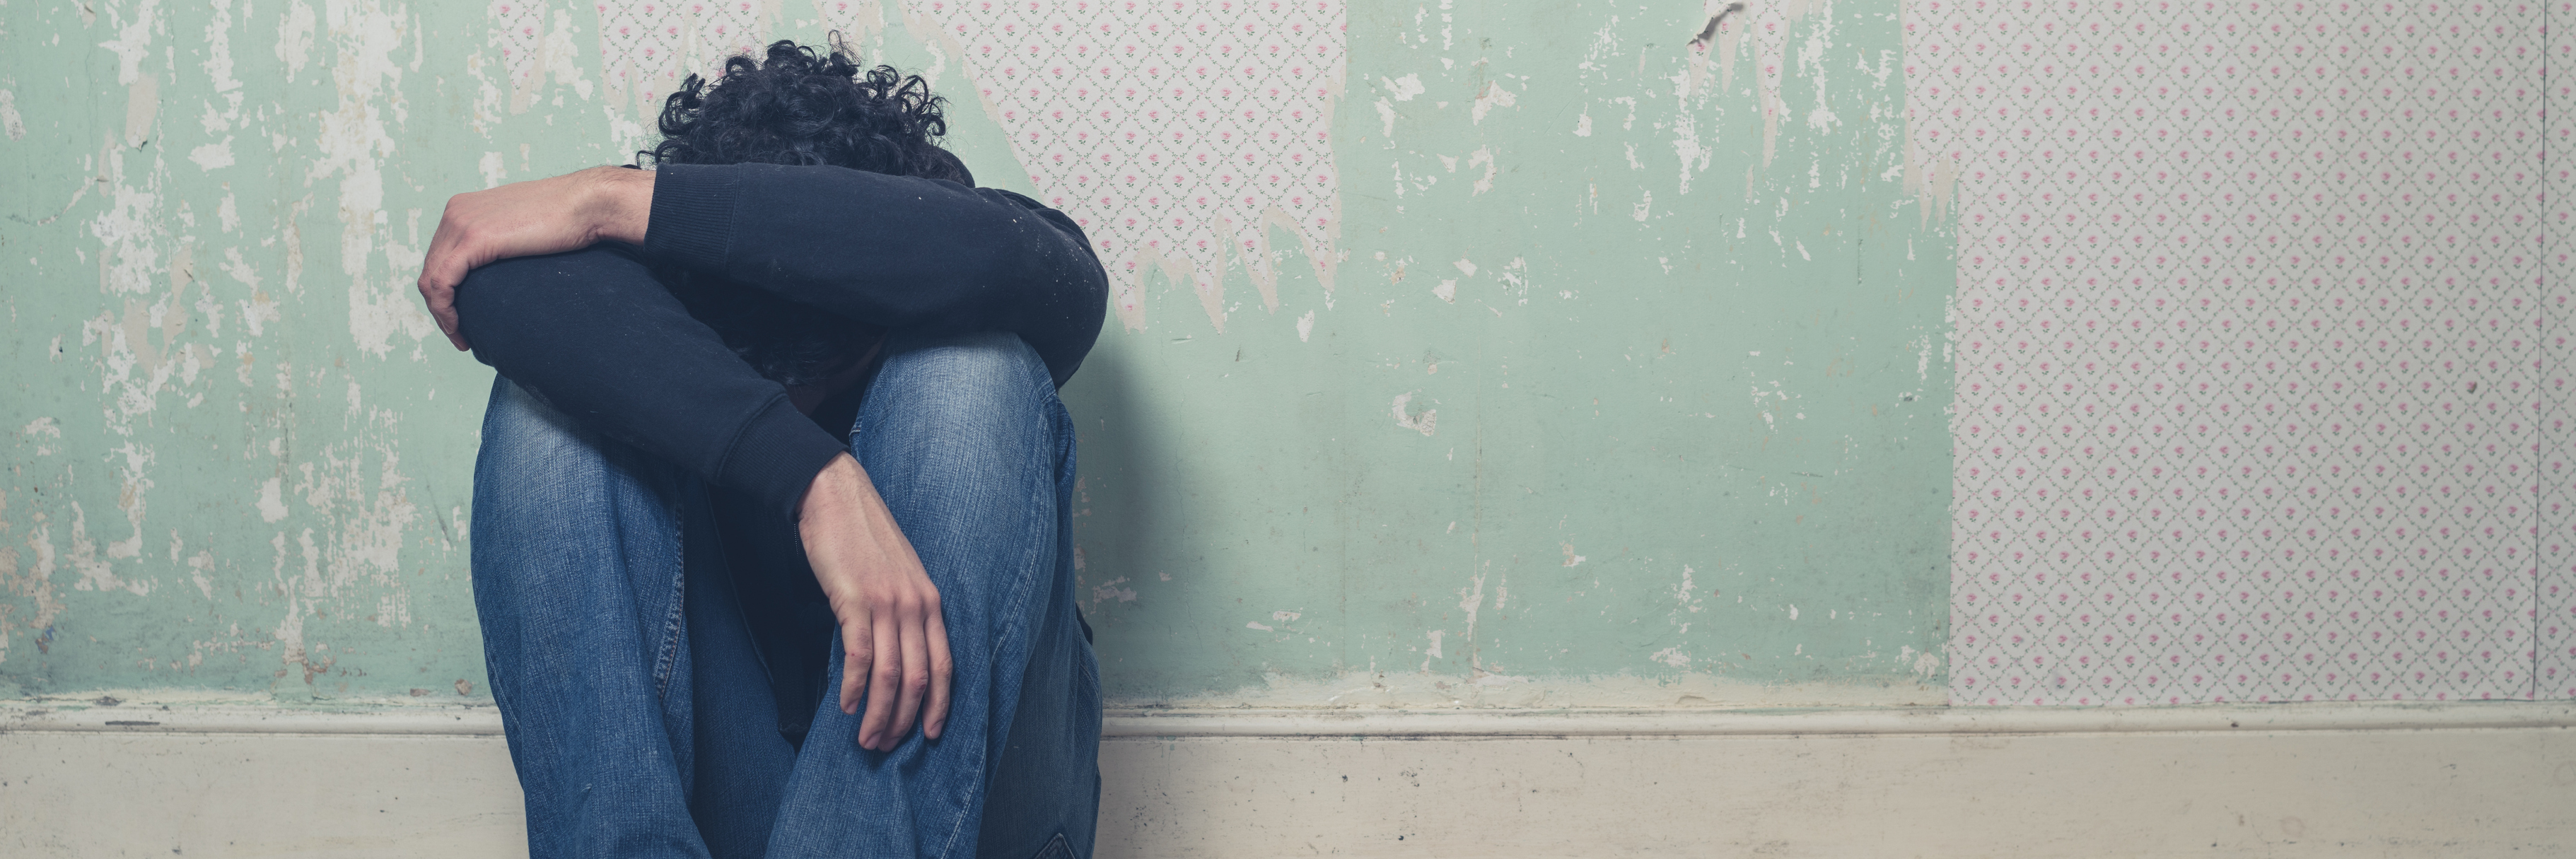 depressed young man sitting on floor in empty room with peeling wallpaper